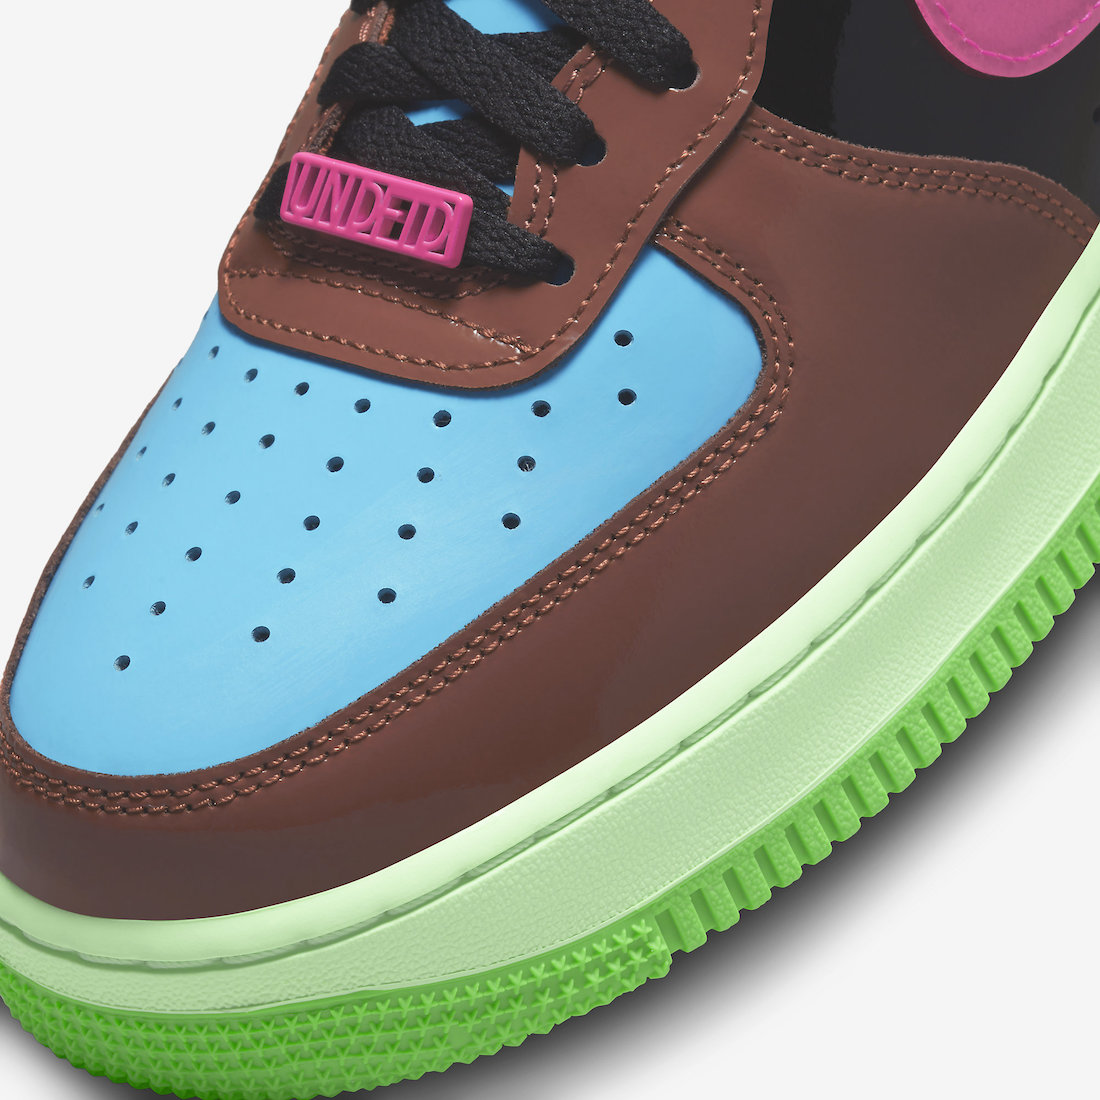 Undefeated nike elite vintage sale flyer free printable Low Fauna Brown DV5255-200 Release Date